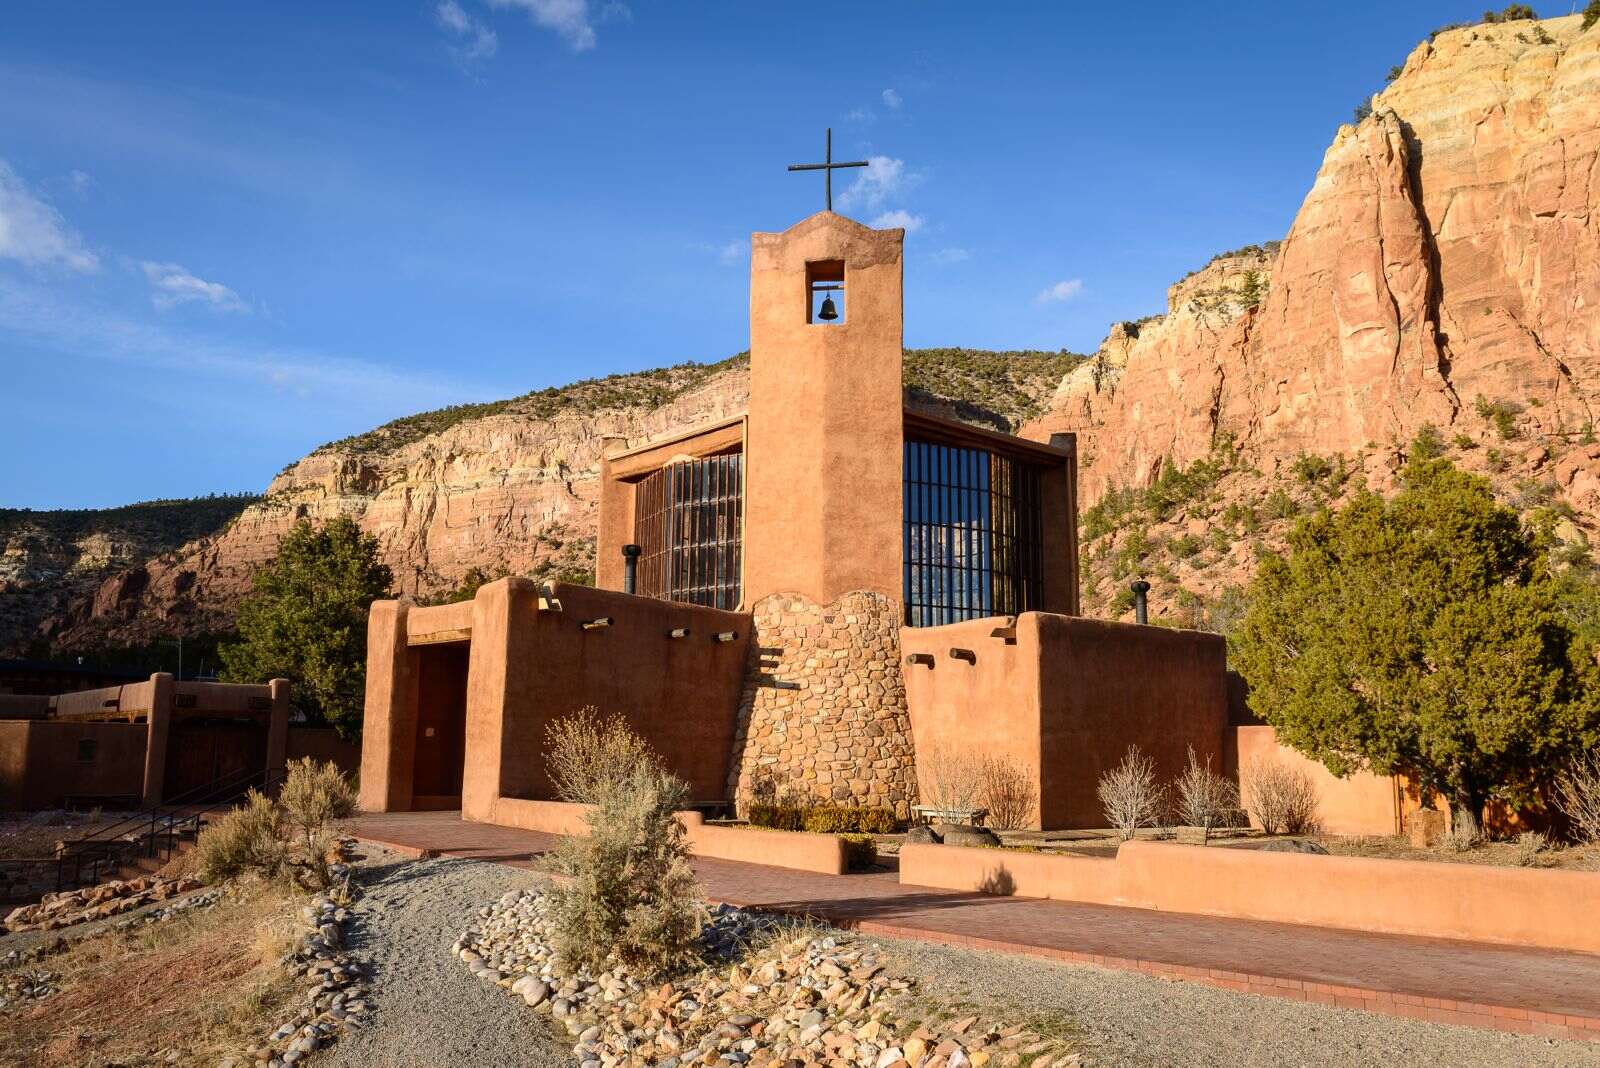 15-extraordinary-facts-about-christ-in-the-desert-monastery